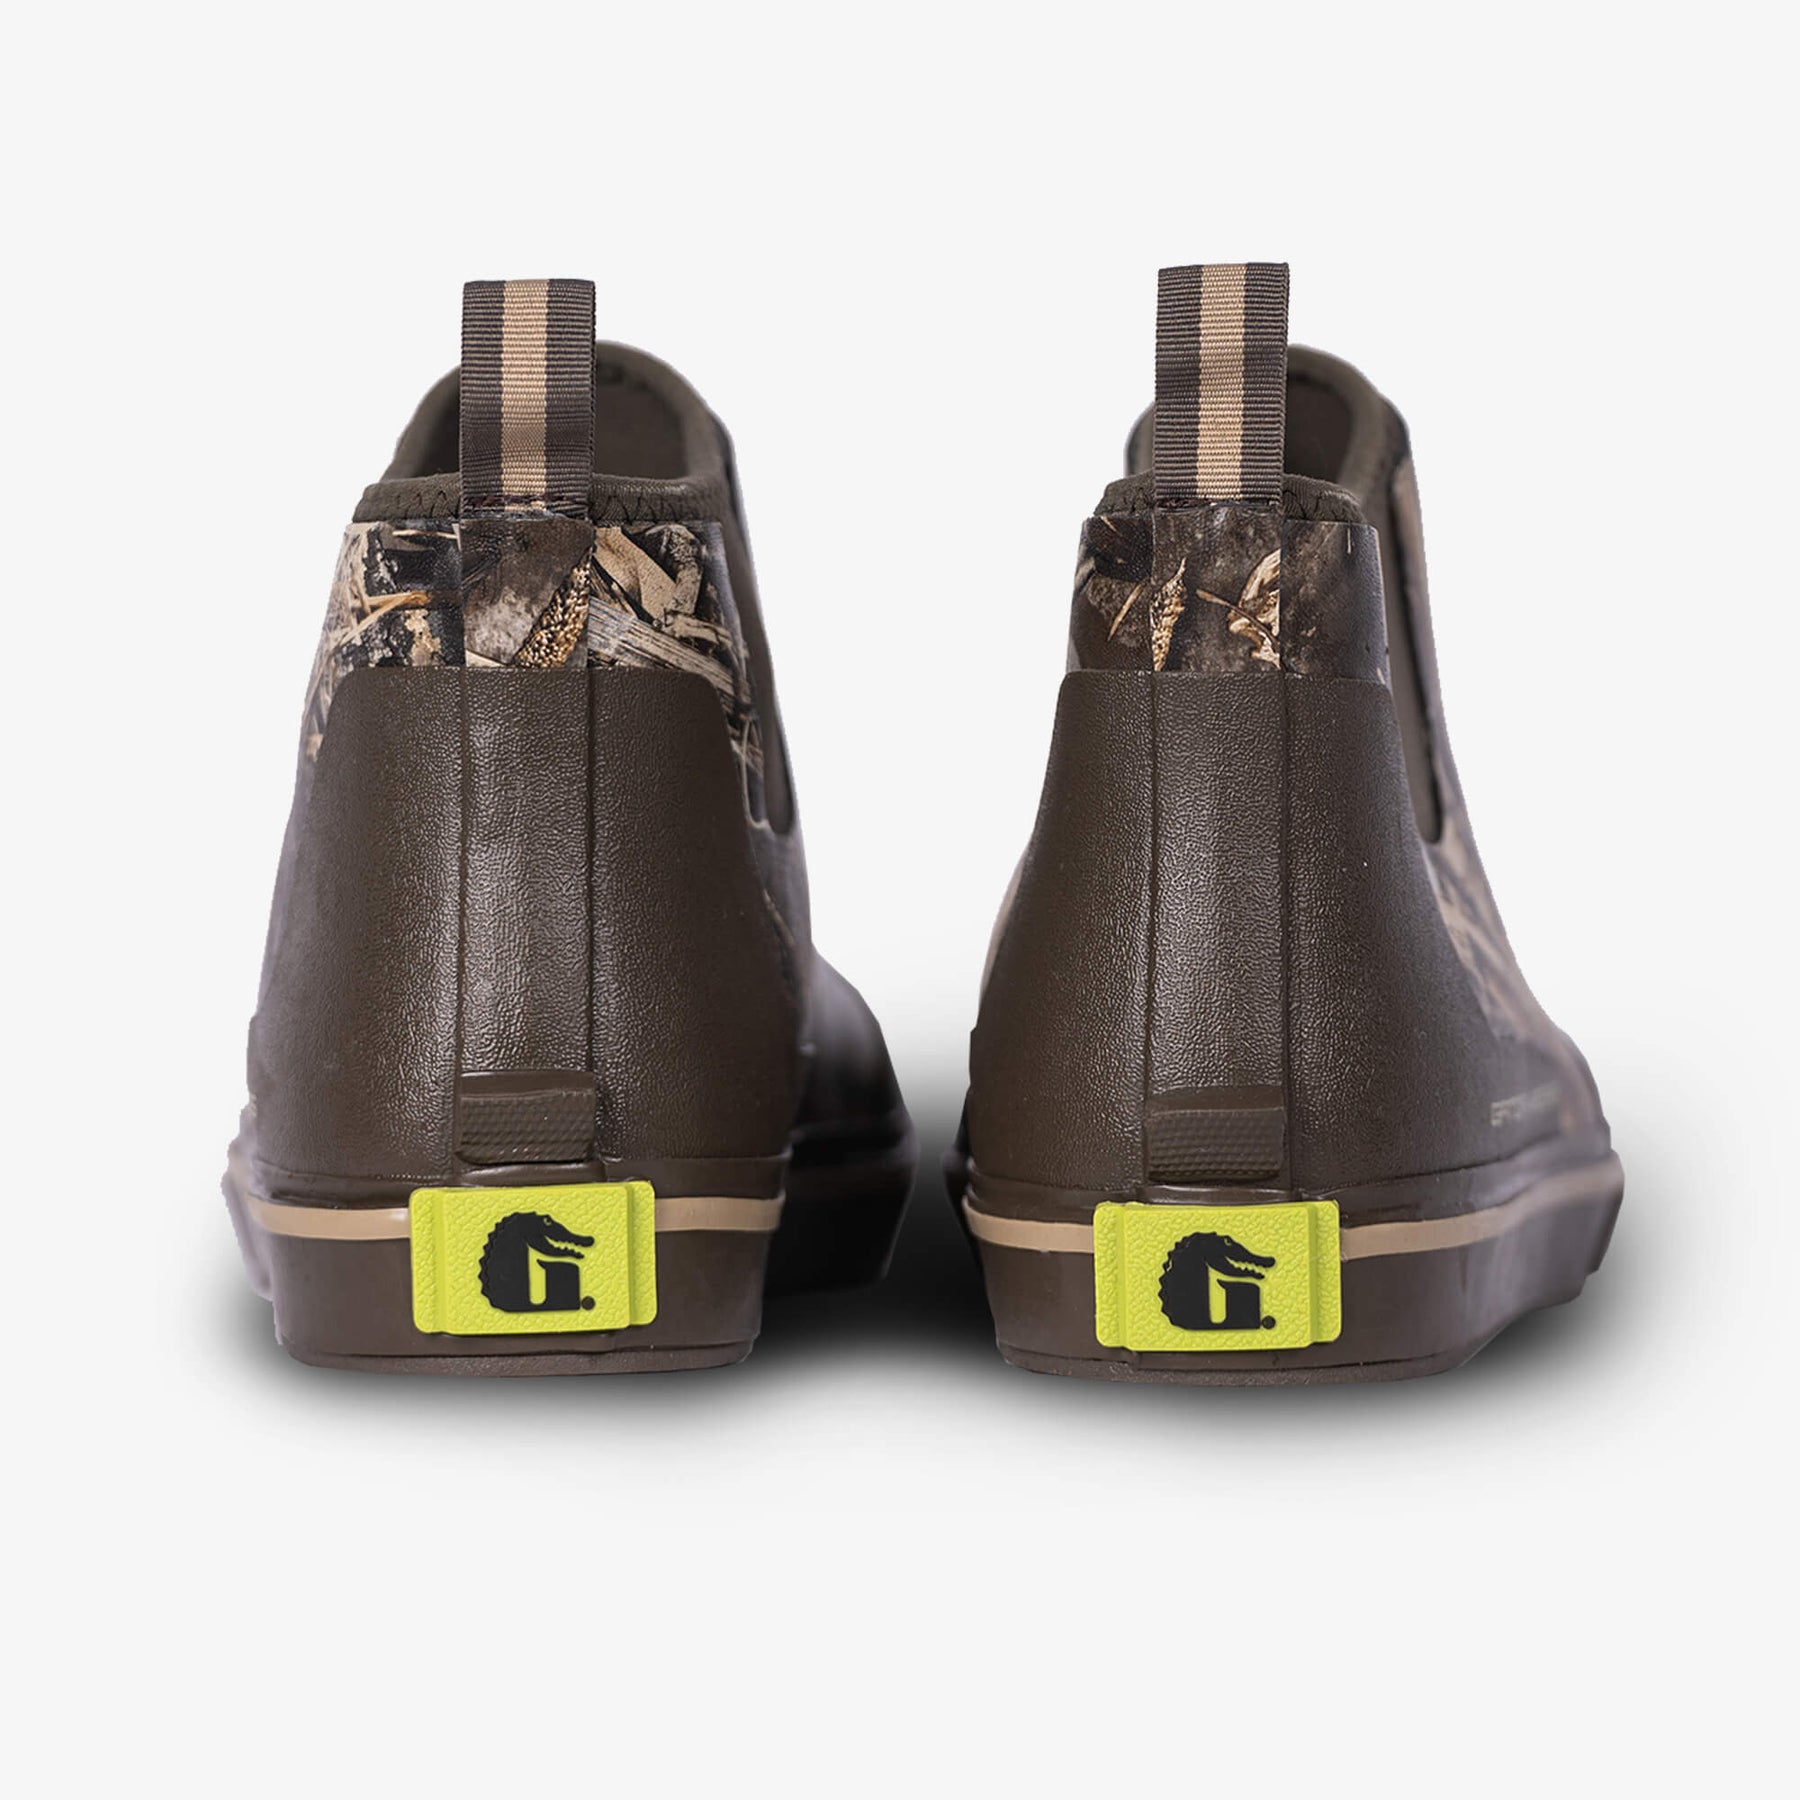 Gator Waders Ankle Hunting Boots | Men's - Realtree Max-7 - Sportsman Gear